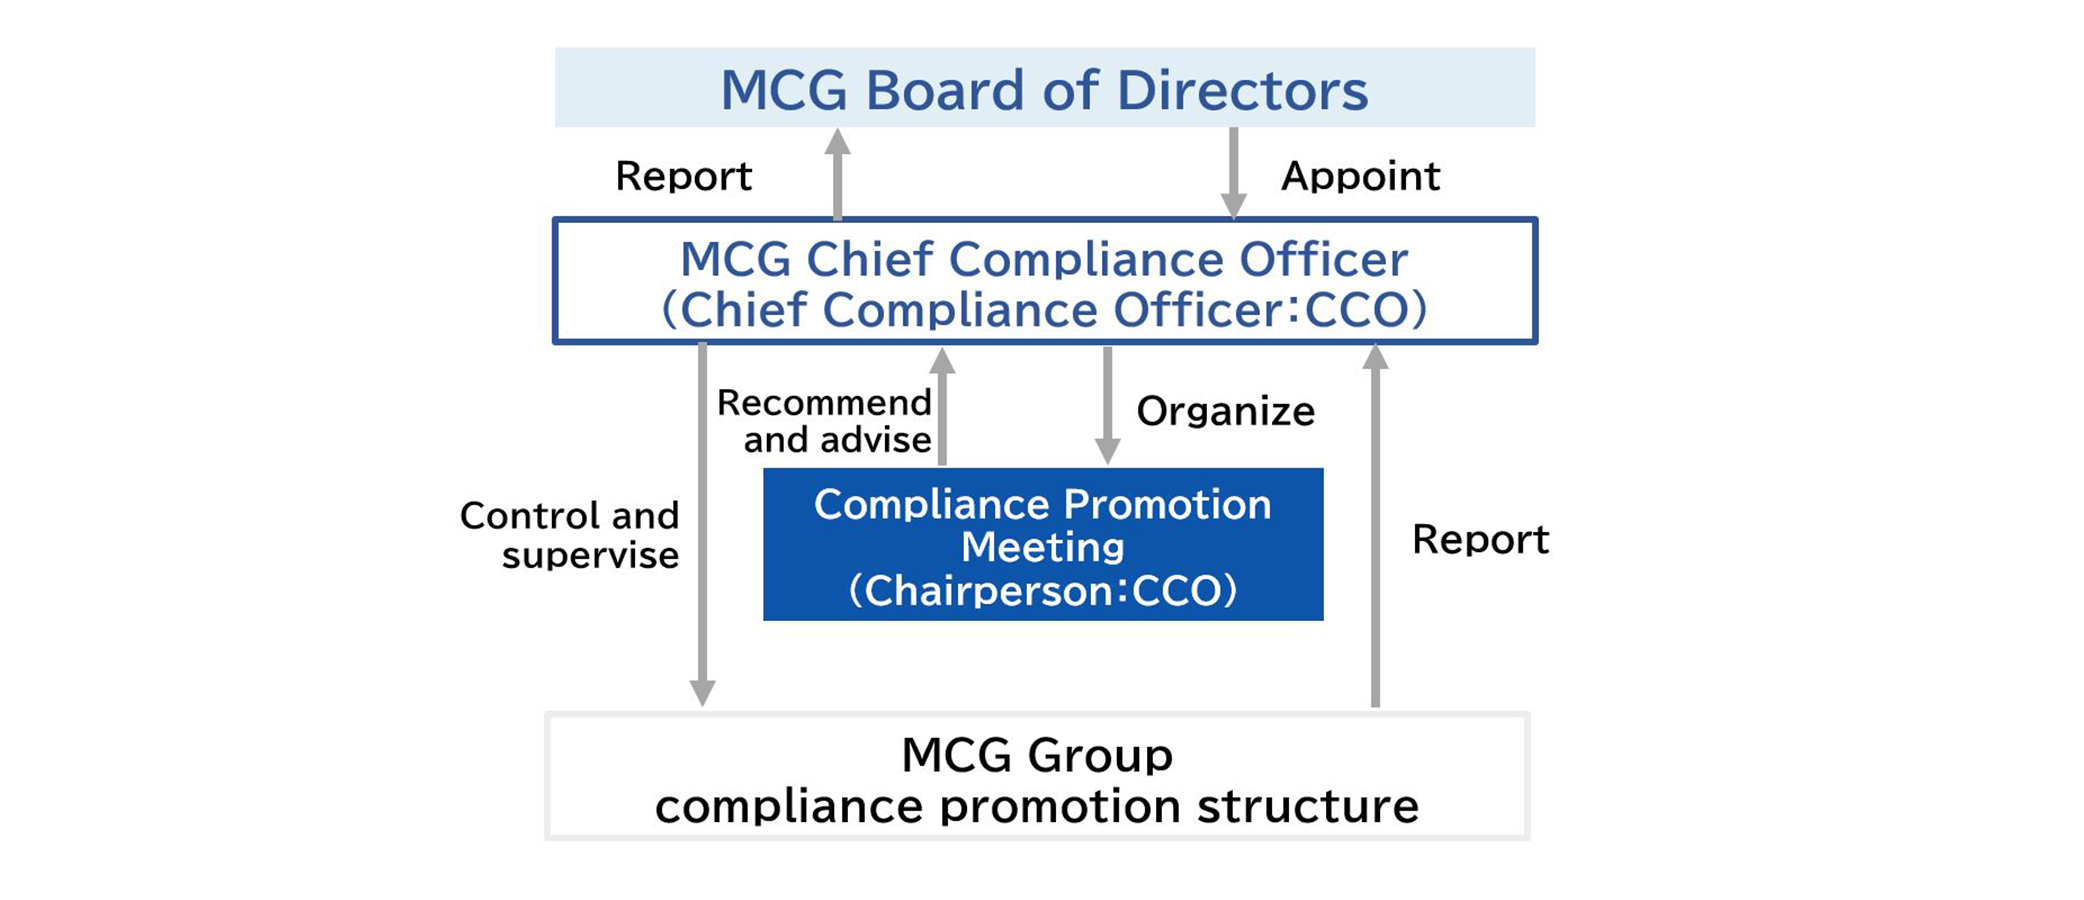 Compliance system diagram: “Mitsubishi Chemical Holding Corporation Board of Directors” gives instructions and makes requests to CCOs with respect to operating companies and receives reports from CCOs.
                        Each operating company has a “Board of Directors,” “Chief Compliance Officer (CCO),” “Compliance Promotion Committee (Chairperson: CCO),” and “Compliance promotion structure.”
                        “Board of Directors” appoints and receives reports from “Chief Compliance Officer (CCO),” and controls/supervises and receives reports from “Compliance promotion structure.”
                        “Chief Compliance Officer (CCO)” organizes and receives recommendations/advice from “Compliance Promotion Committee (Chairperson: CCO).”
                        “Mitsubishi Chemical Holding Corporation Board of Directors” appoints and receives reports from “MCG Group Chief Compliance Officer (Group CCO).” 
                        “MCG Group Chief Compliance Officer (Group CCO)” makes reports to and receives recommendations/advice from “Management Committee” and controls/supervises and receives reports from “MCG Chemical Holdings Group Corporation compliance promotion structure.”
                        